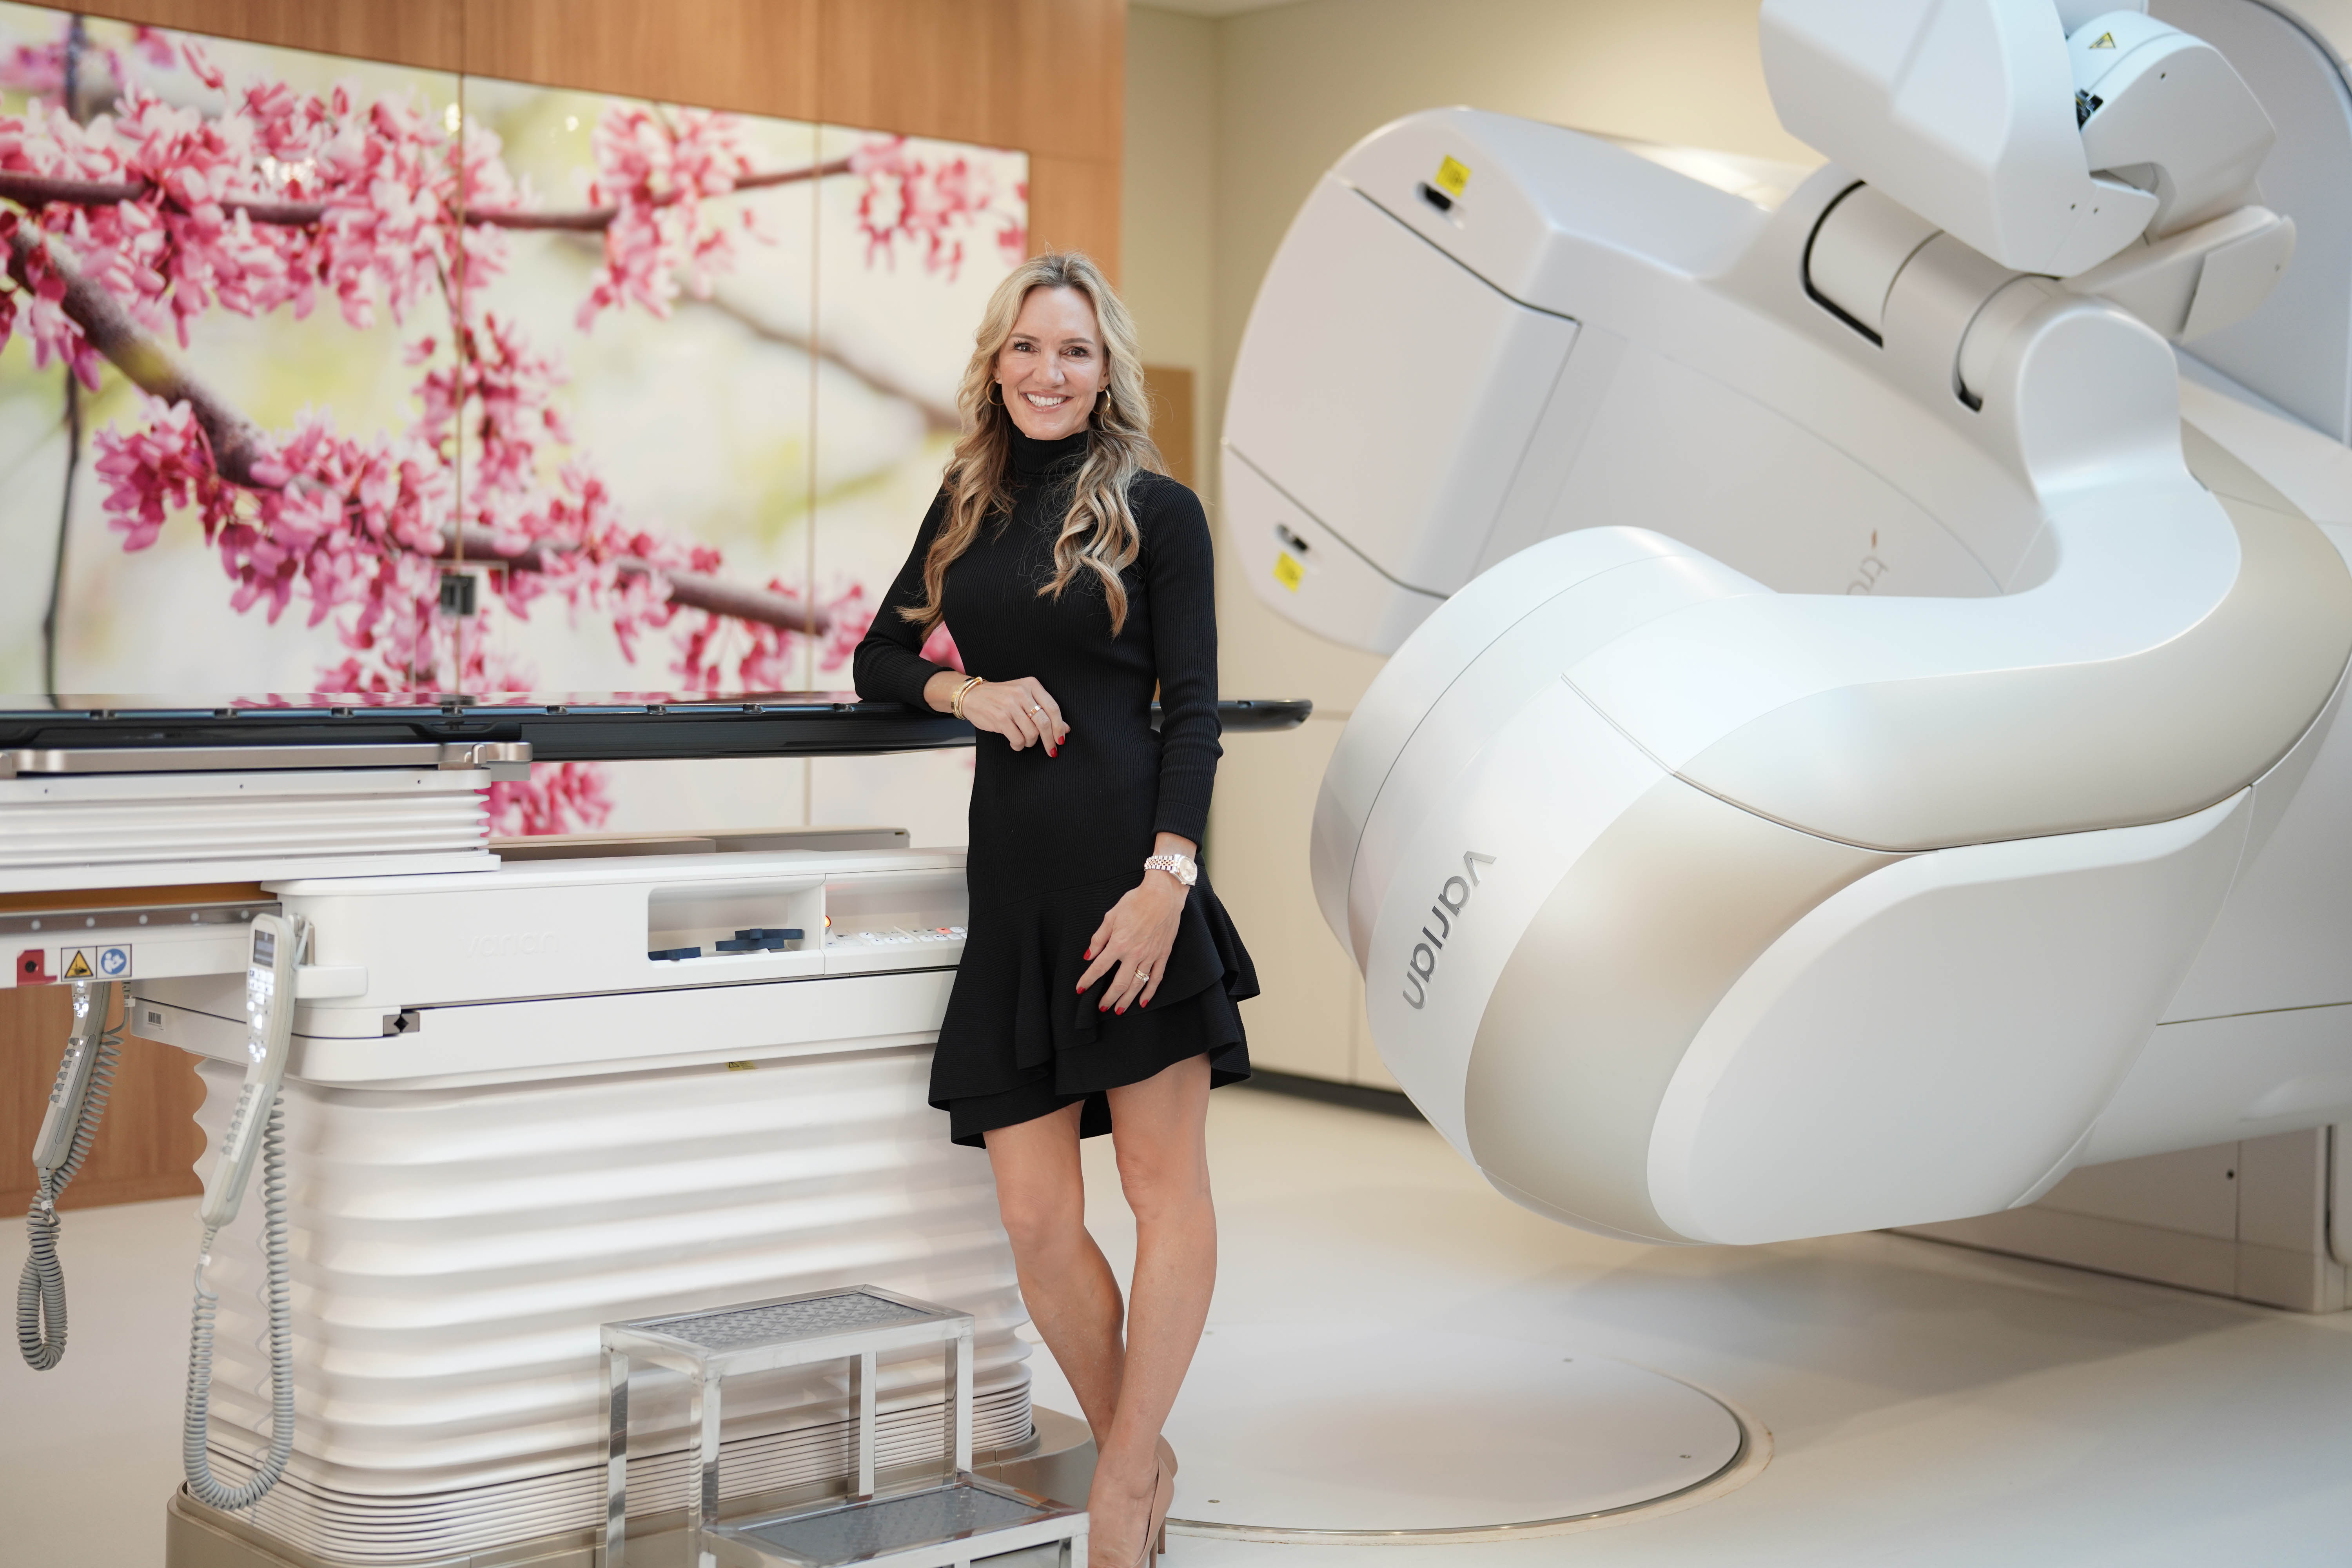 Woman stands in front of medical machine